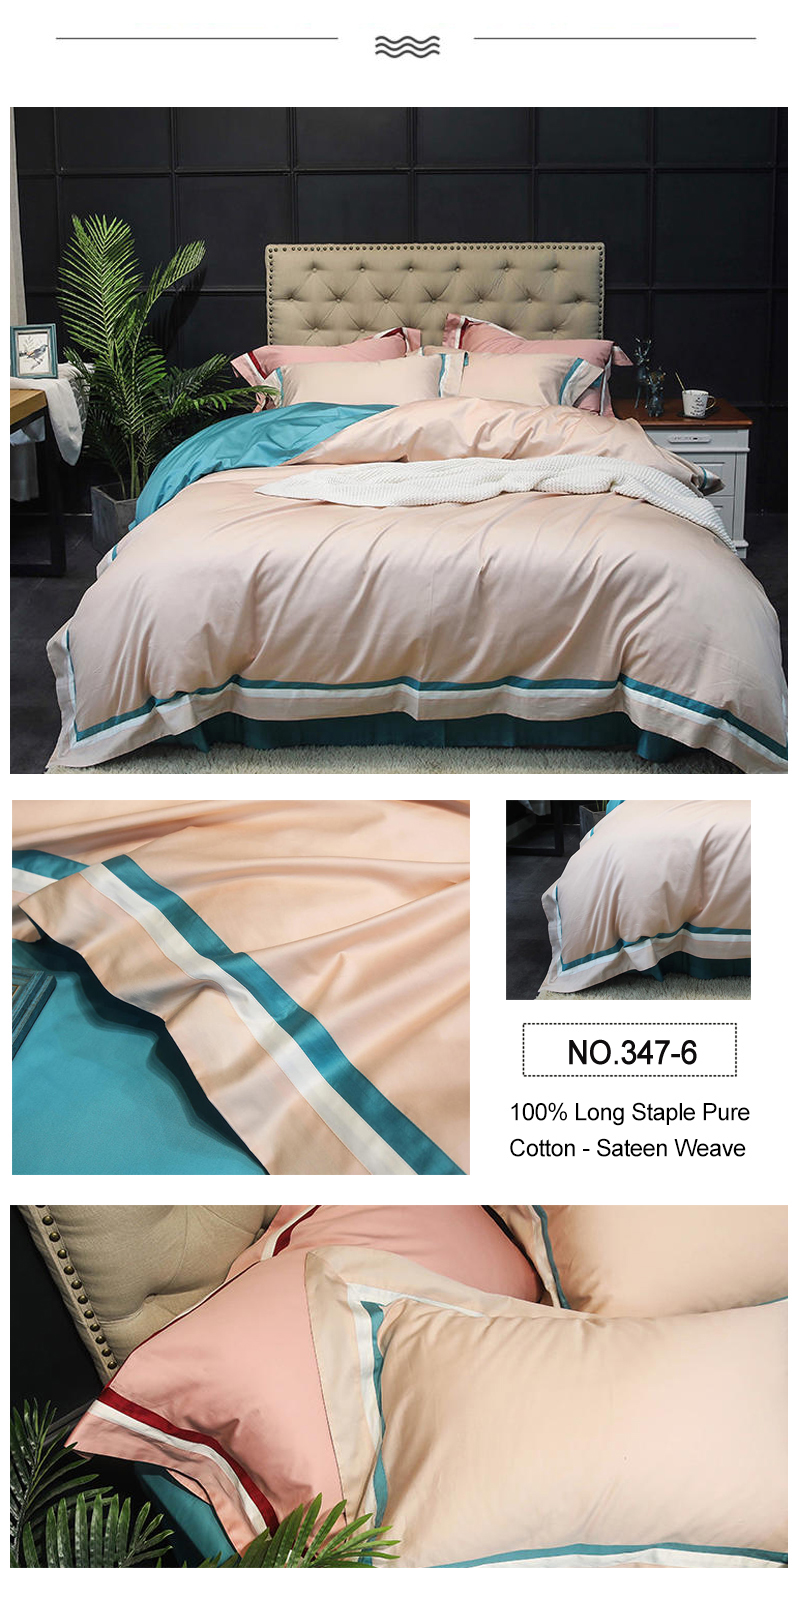 Bed Linen Superior Quality Deluxe